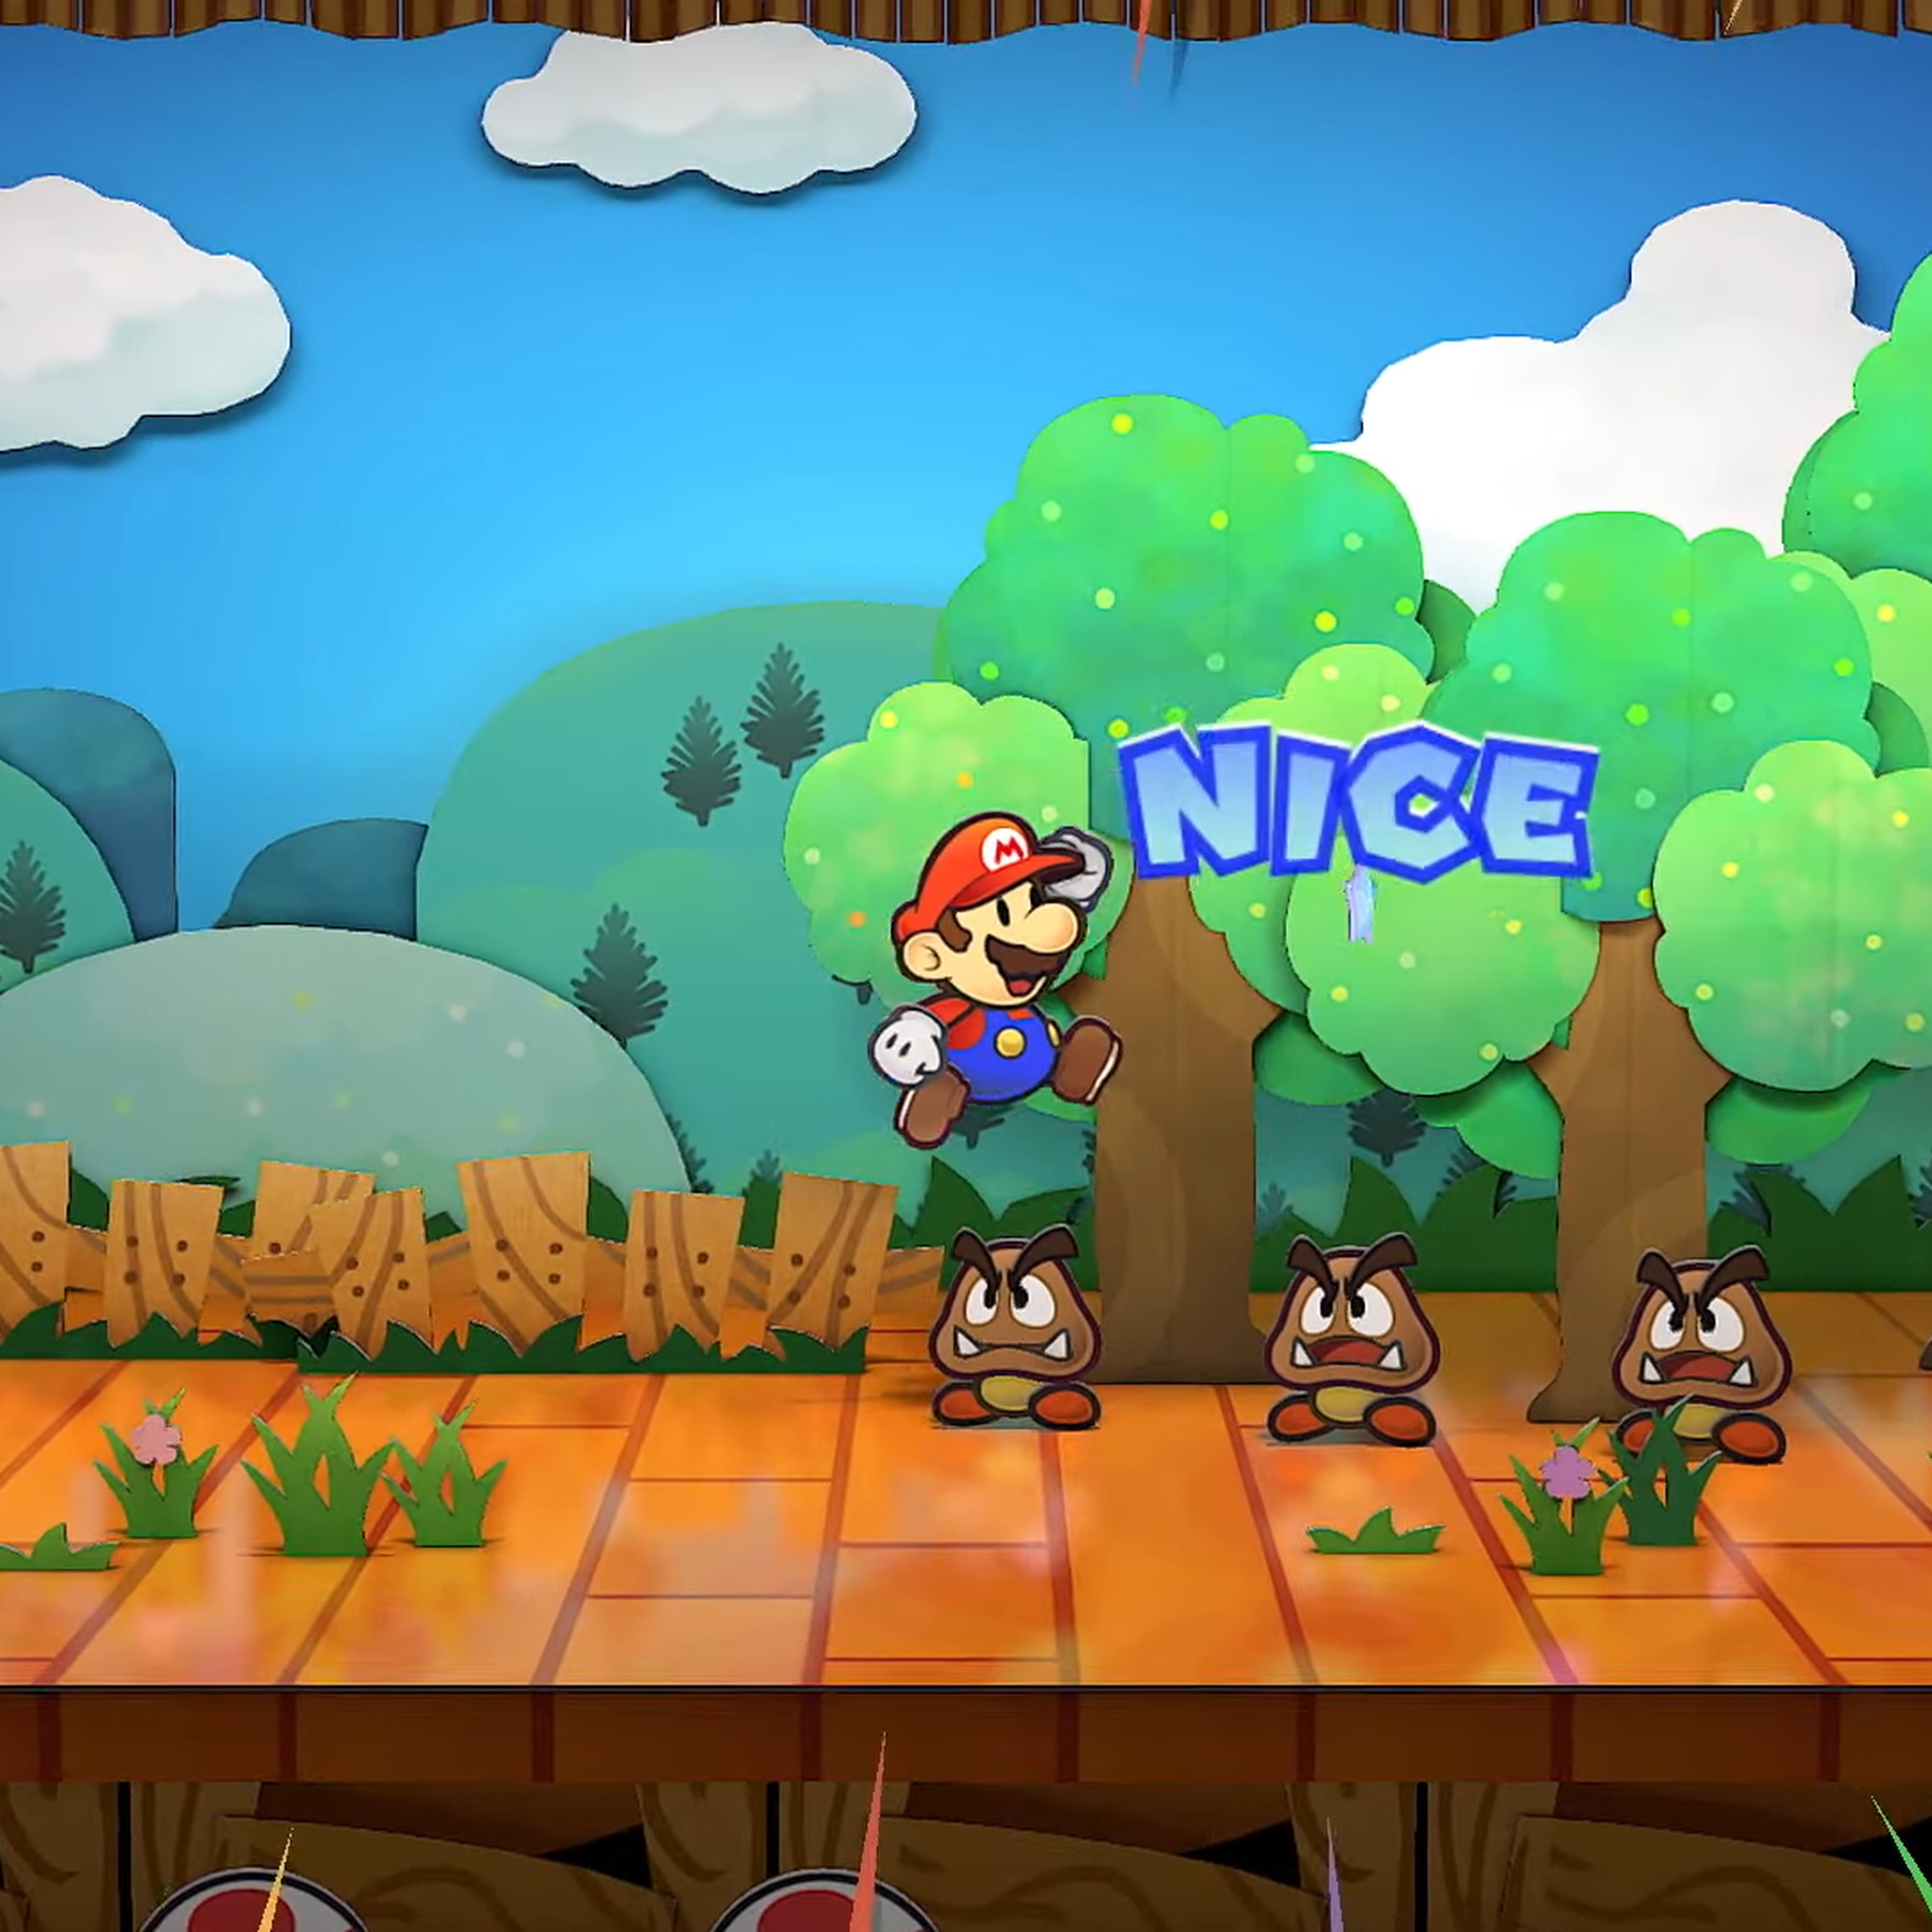 A screenshot from the Paper Mario: The Thousand-Year Door remake.